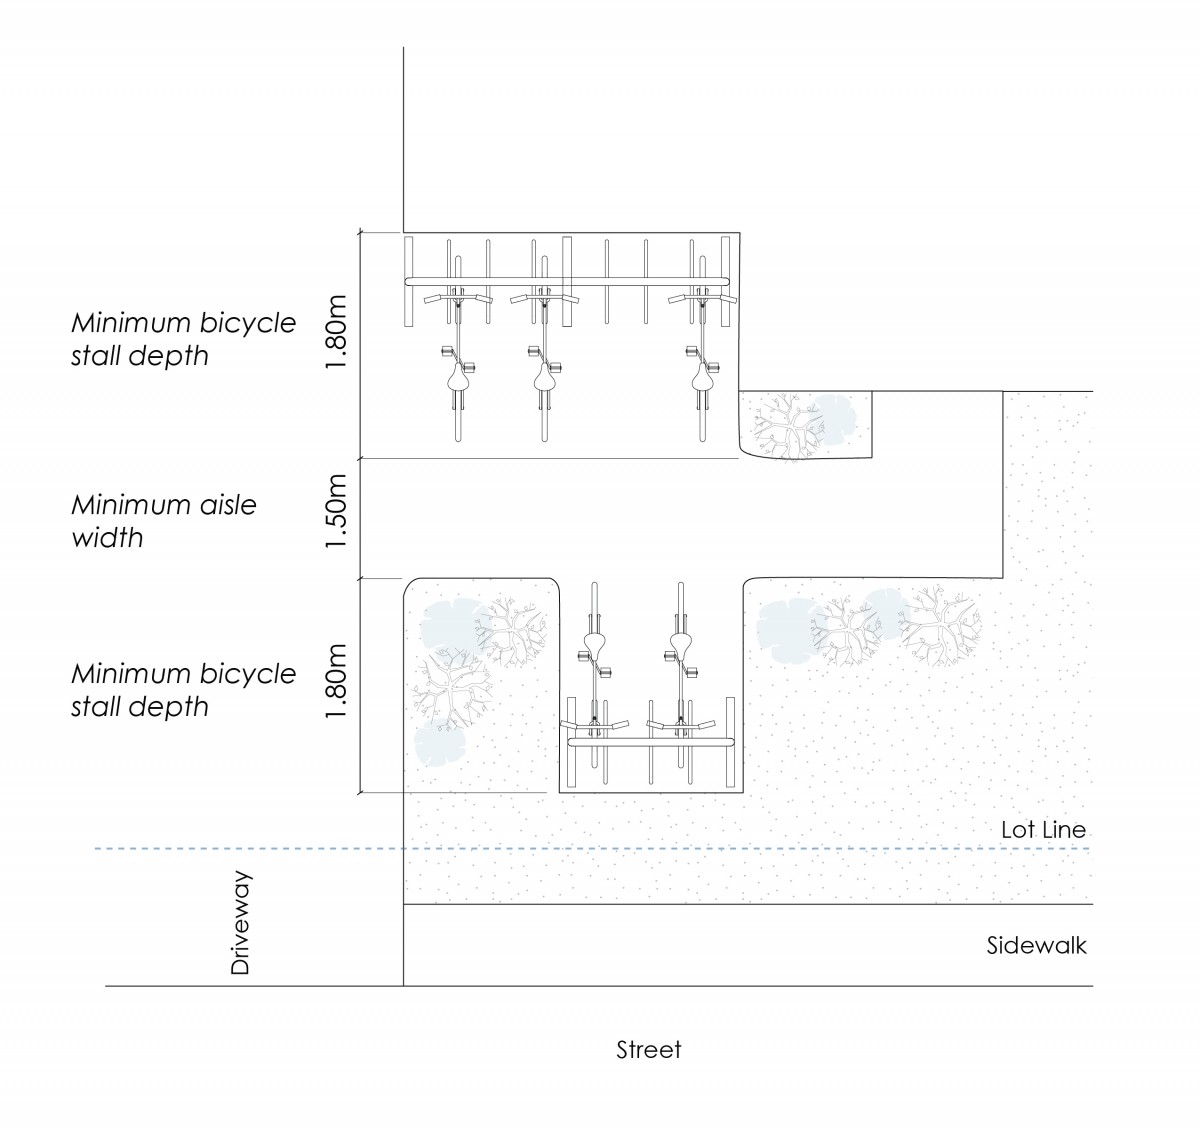 Zoning Bylaw - Figure 8.5.1 - Short-term bicycle parking configuration example